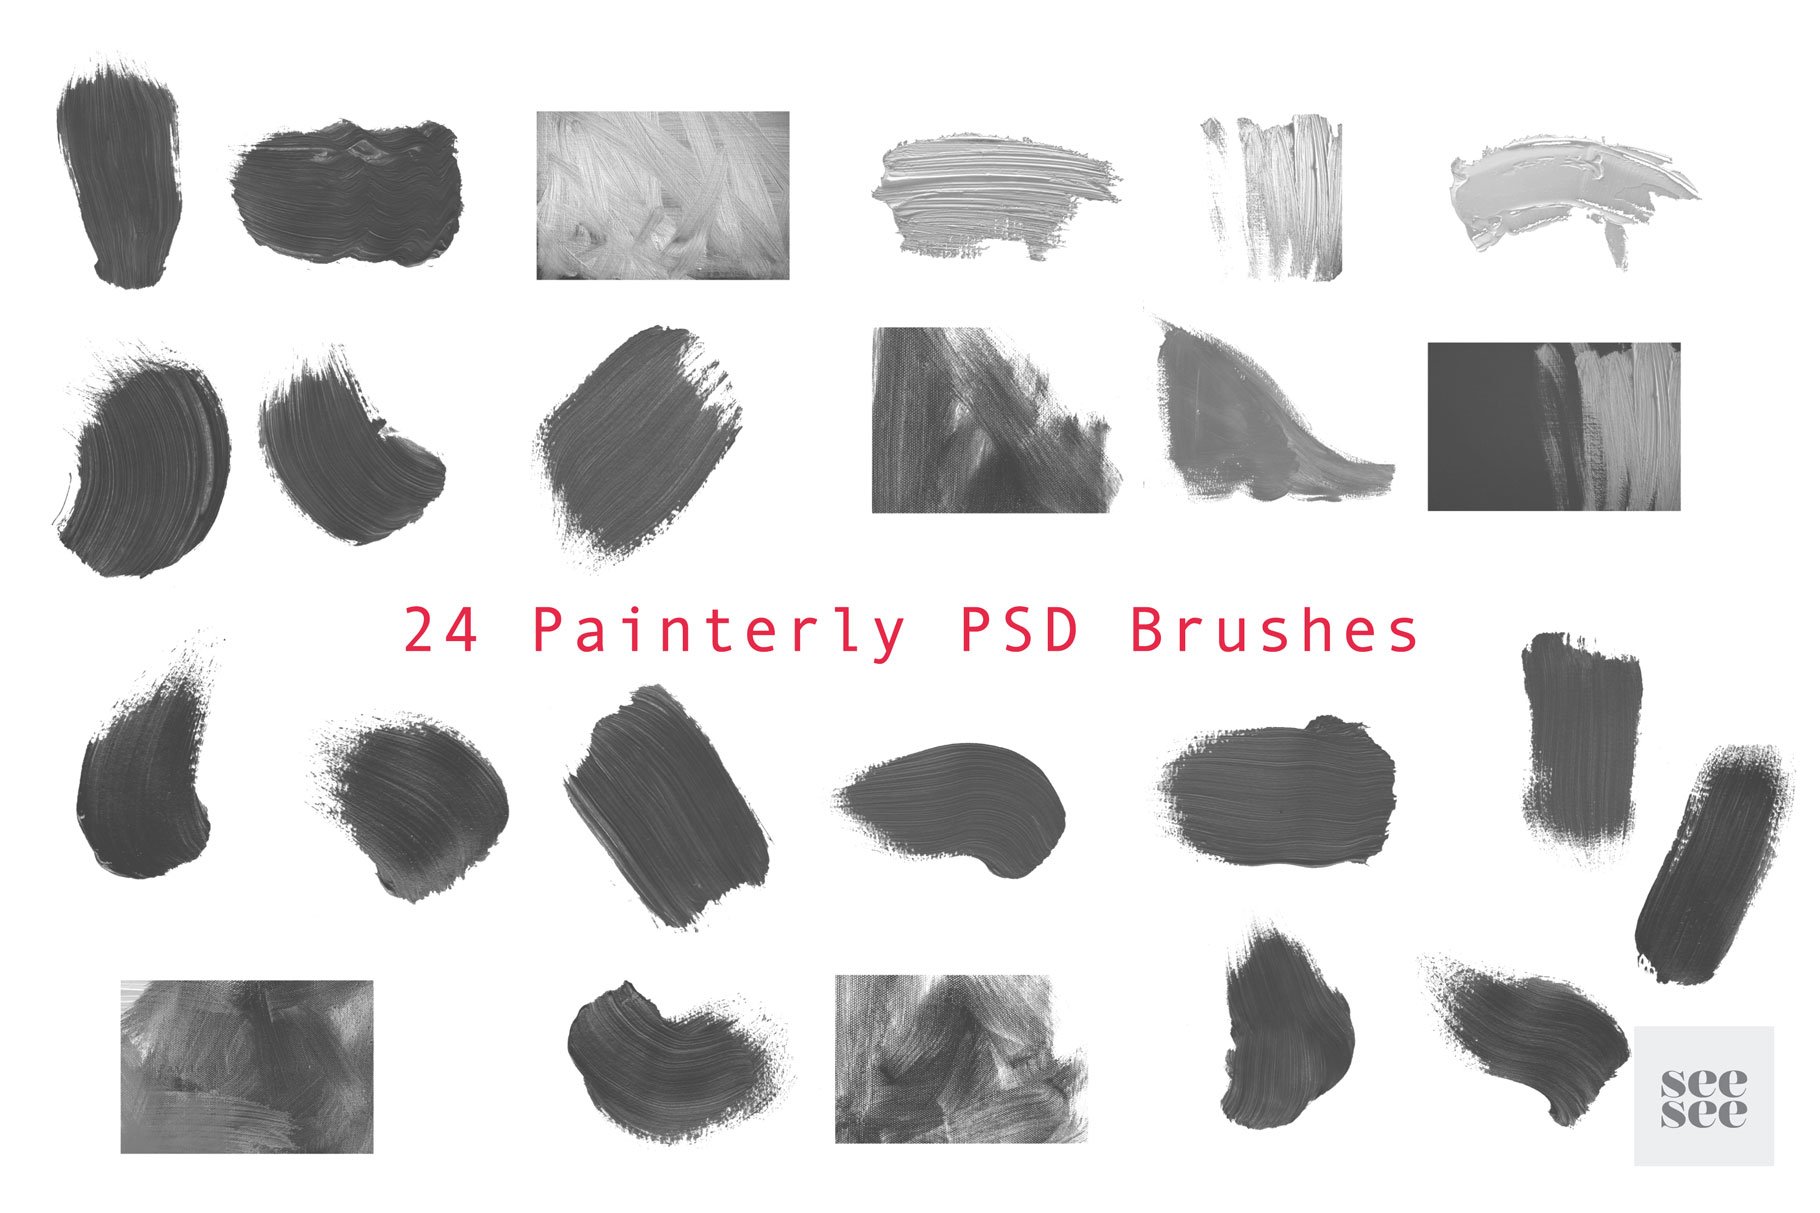 24 Painterly PSD Brushespreview image.